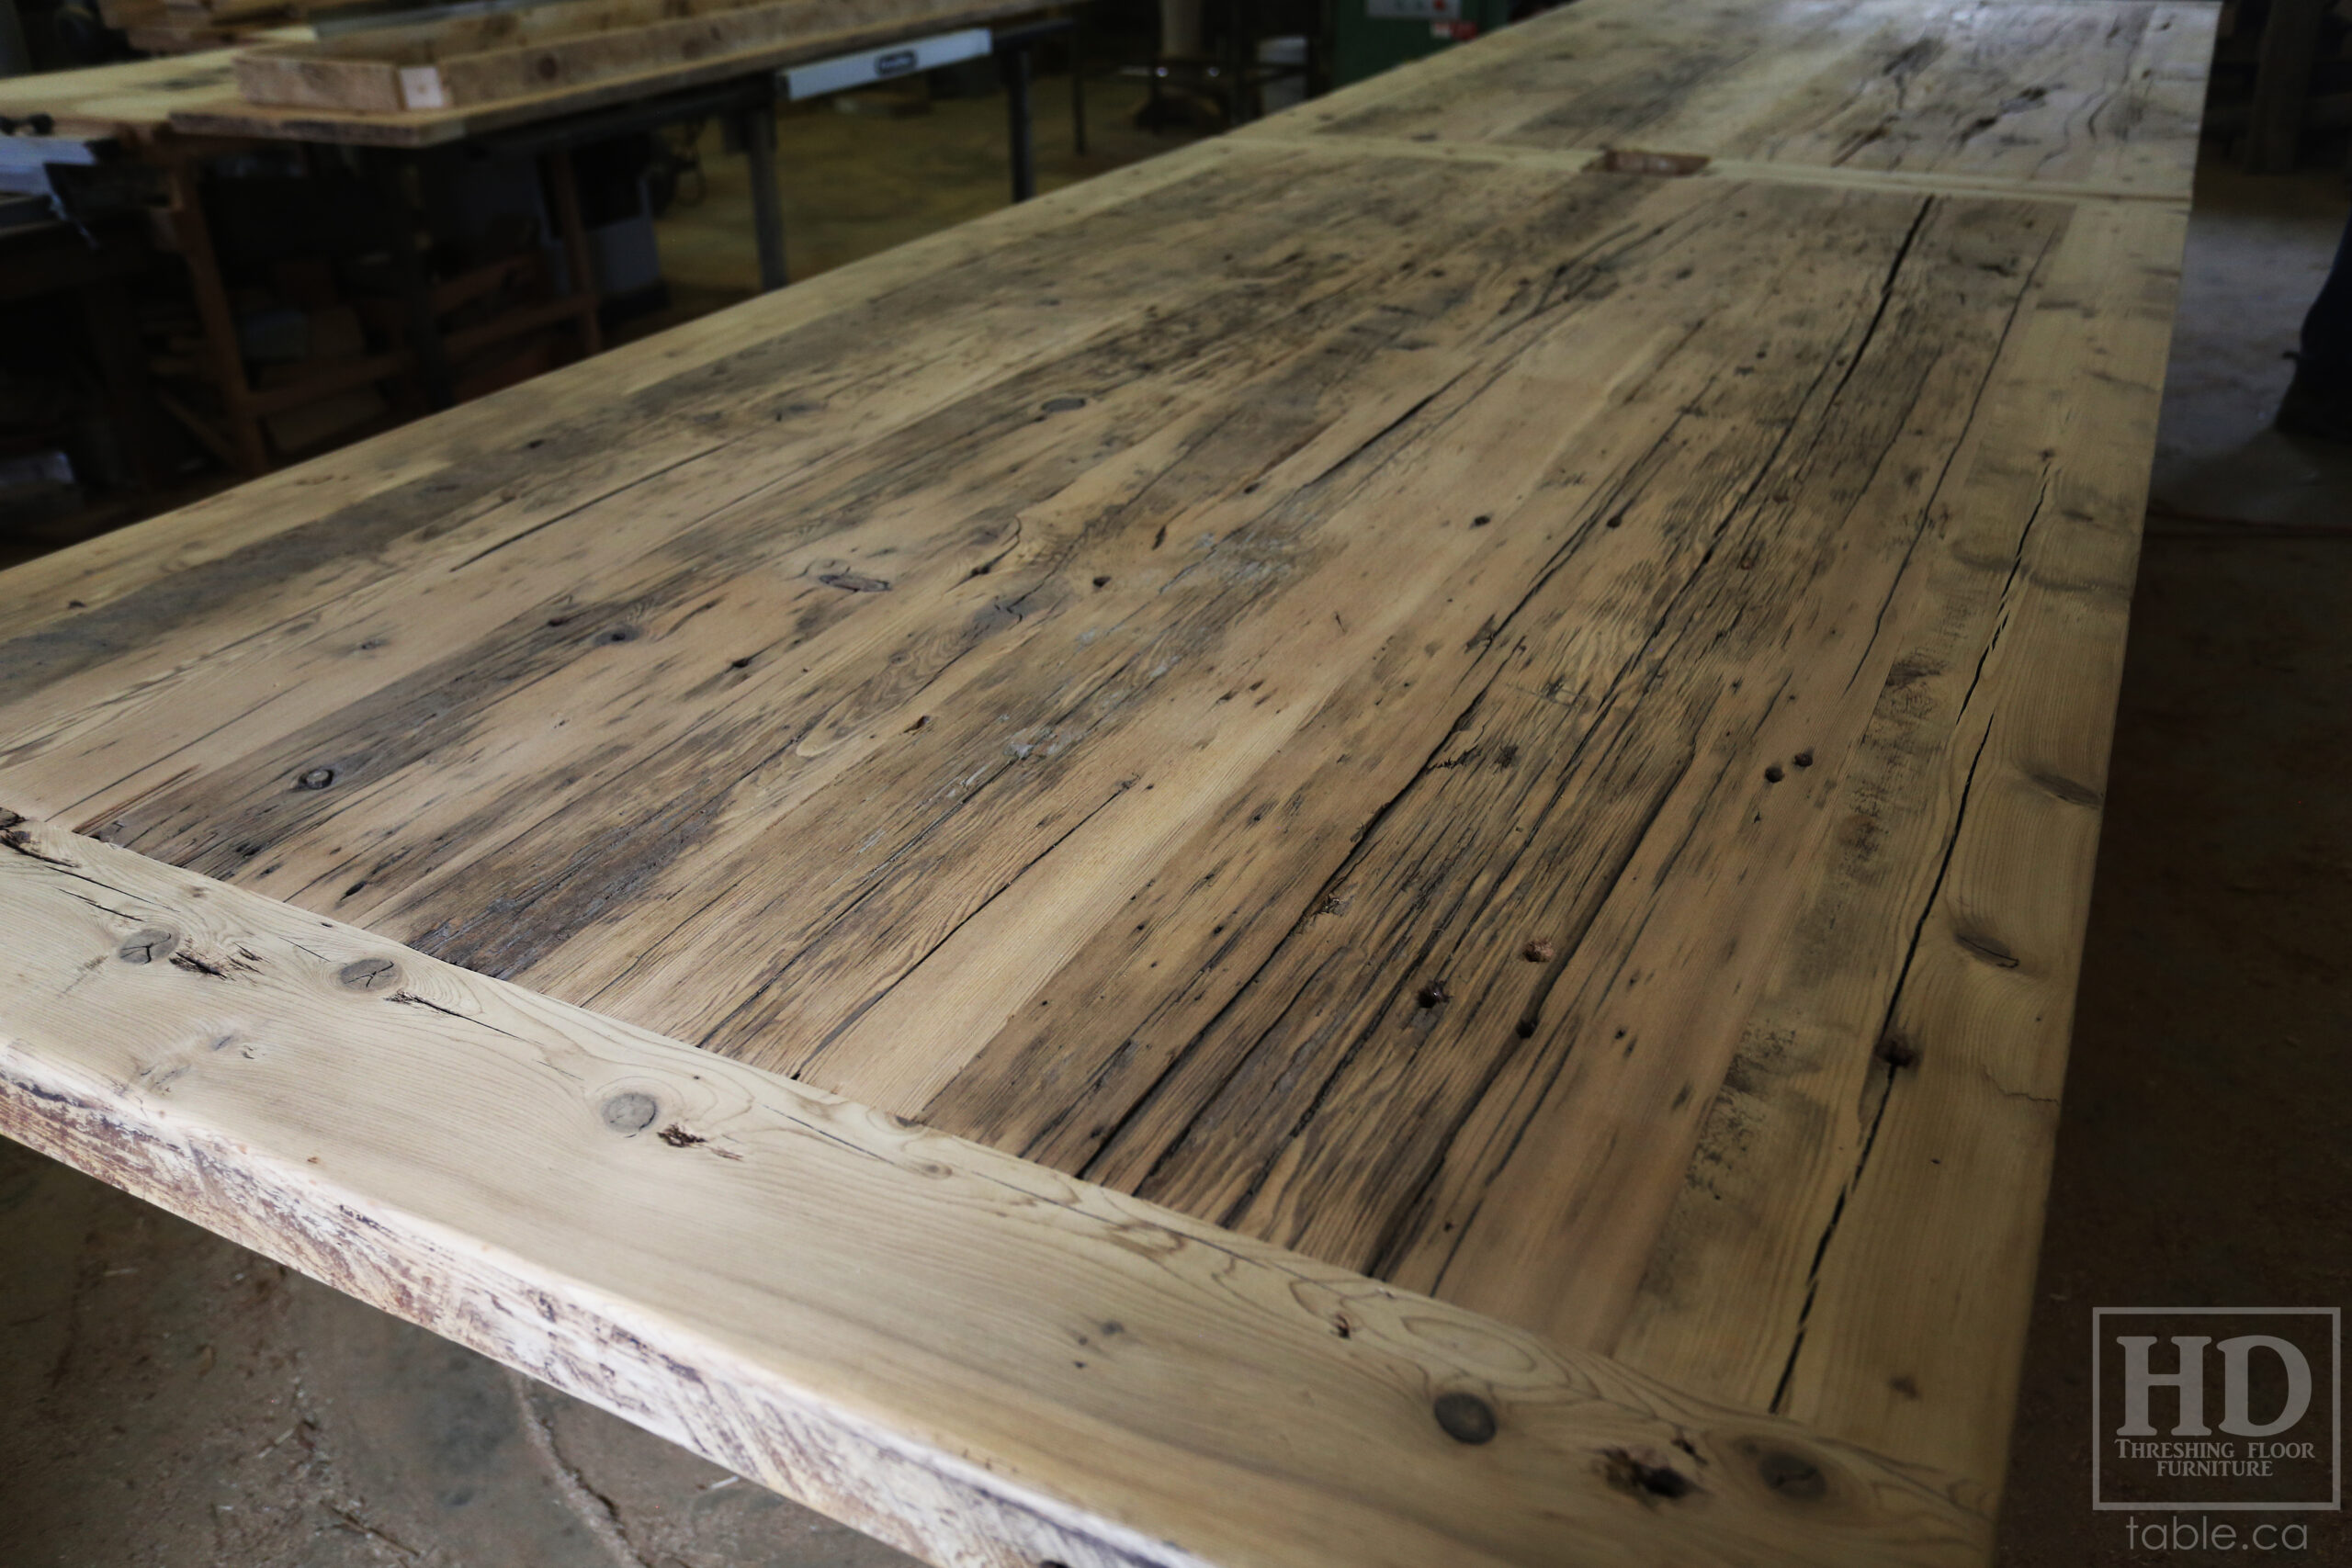 Project details: 17' Ontario Barnwood Boardroom Wood Table we made for a Beamsville, Ontario company - 60" wide â€“ Steel U Shaped Base â€“ Reclaimed Old Growth Hemlock Threshing Floor Construction â€“ Black Stain Option â€“ Centre on-site doweling - Original edges & distressing maintained â€“ Premium epoxy + Satin polyurethane finish  â€“ www.table.ca